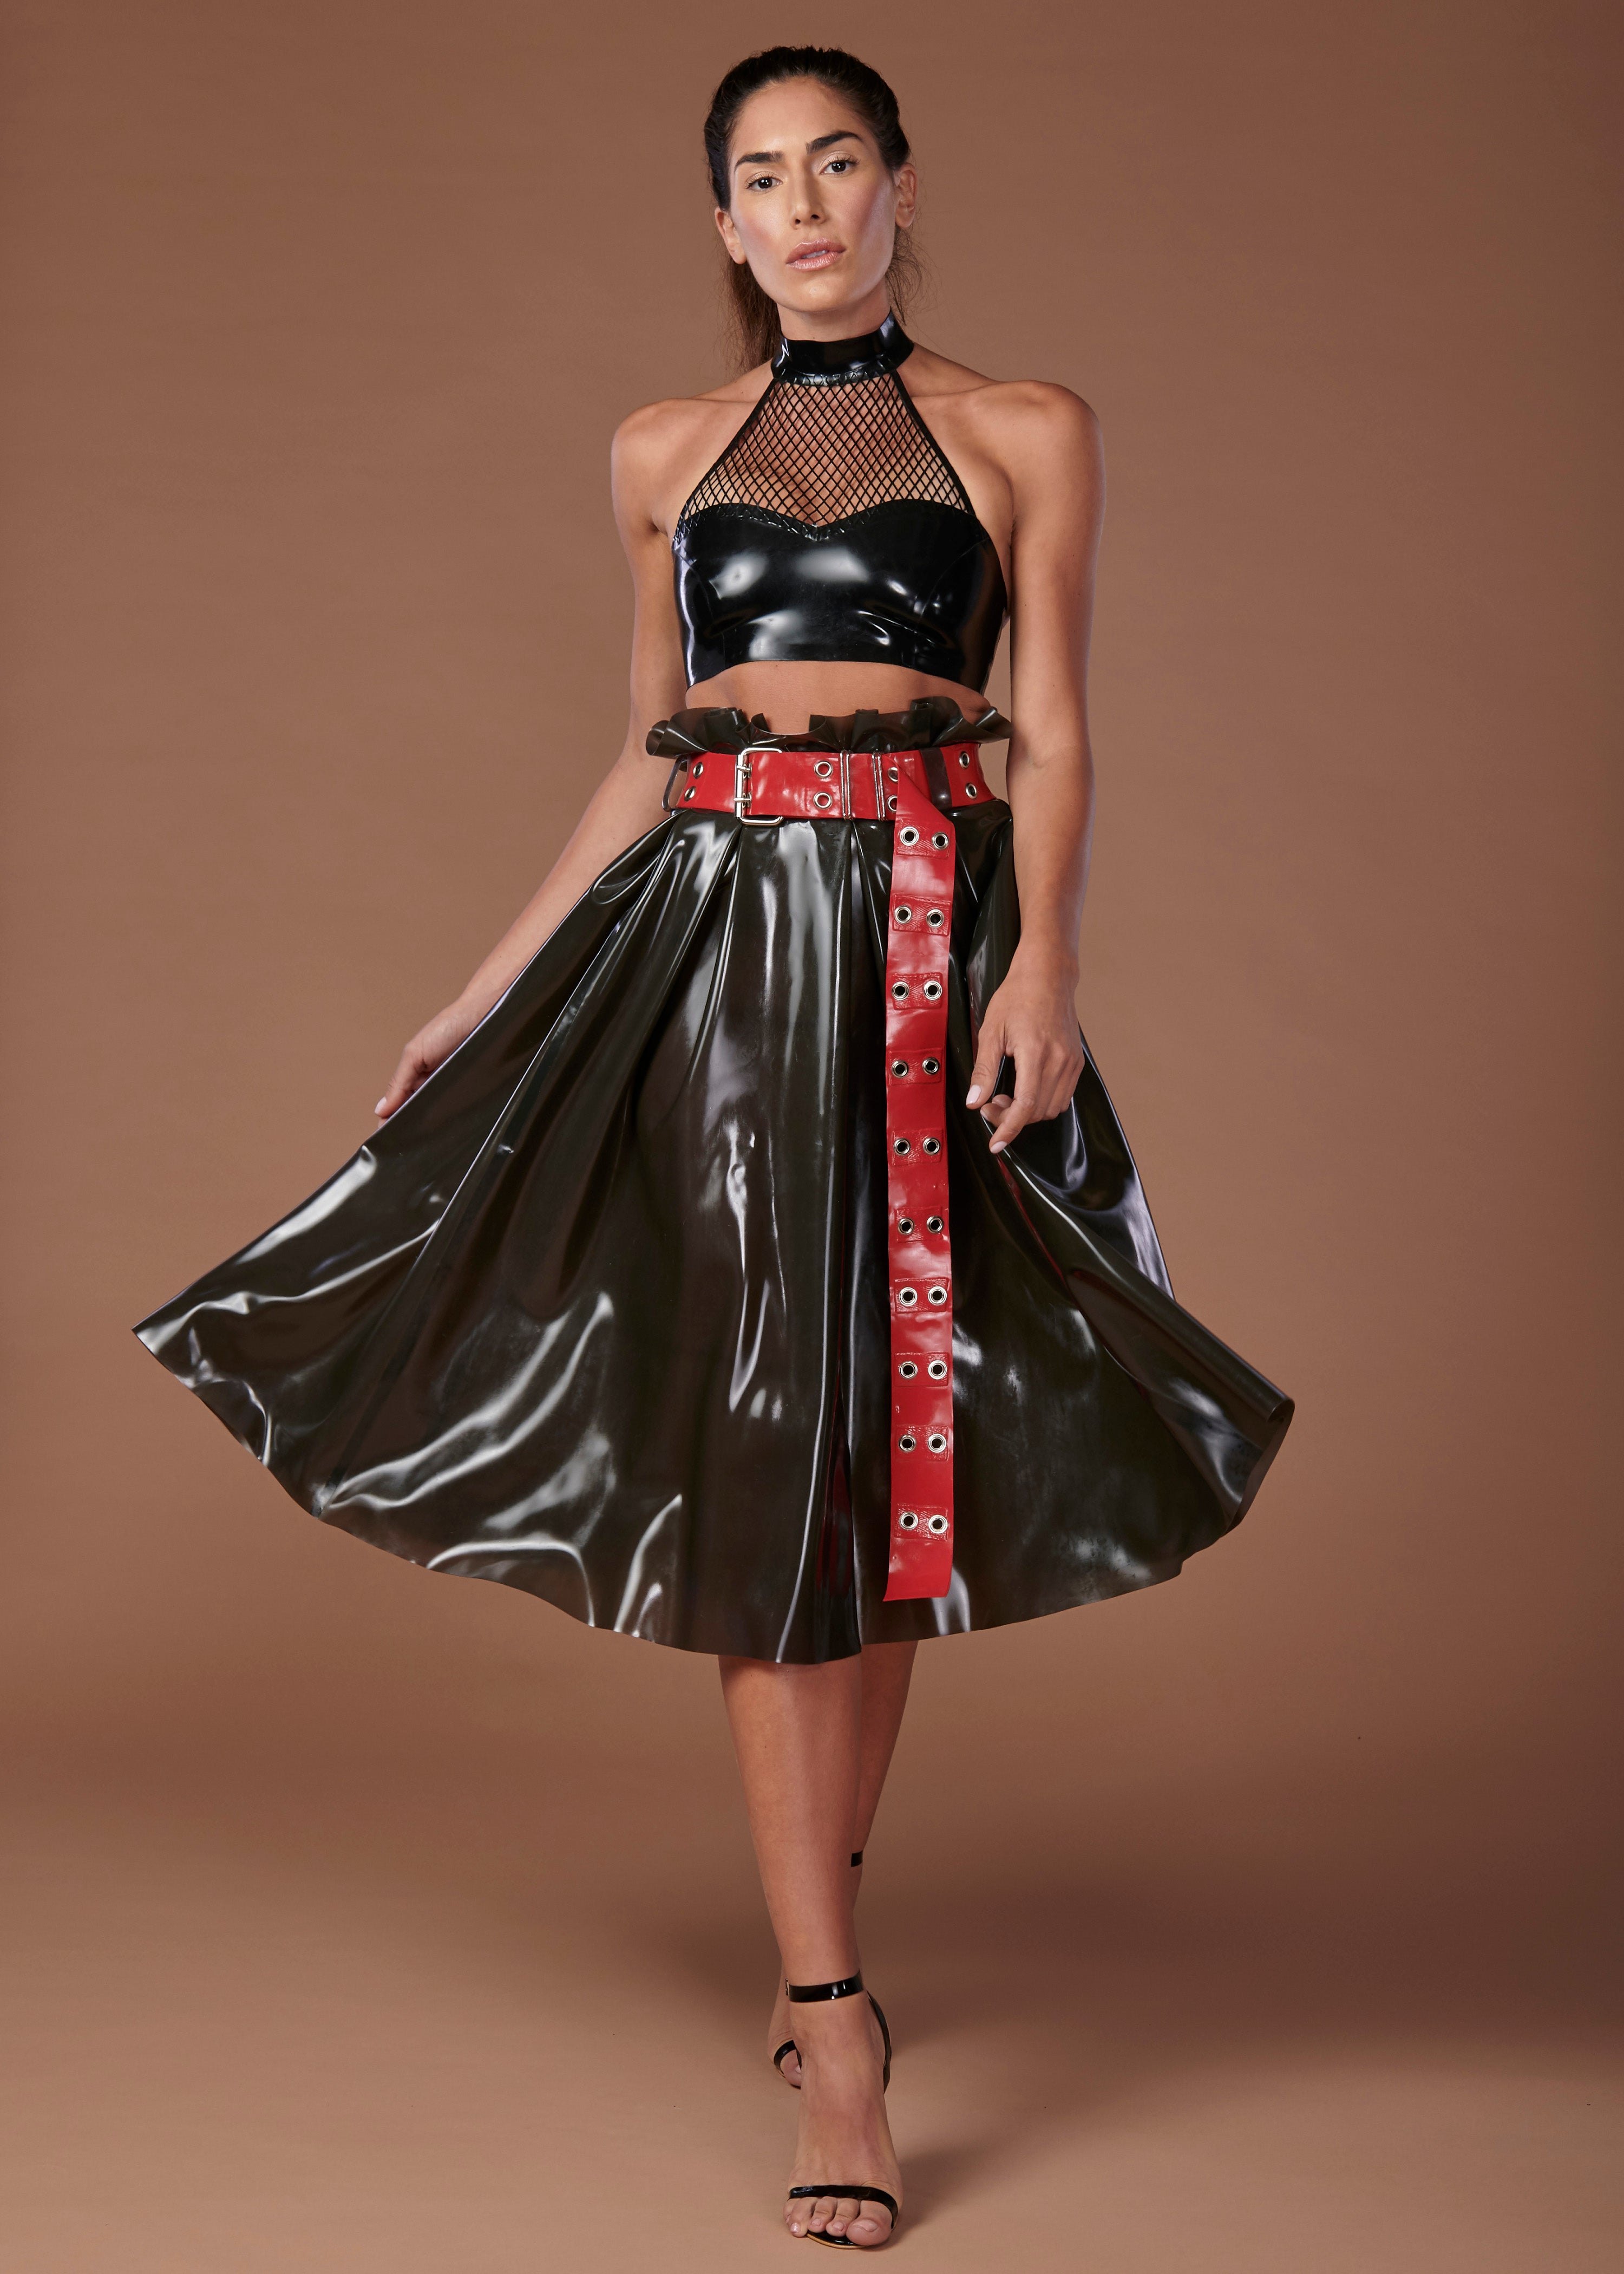 Latex rubber skirts and pants for women by Vex Clothing - Custom Made ...